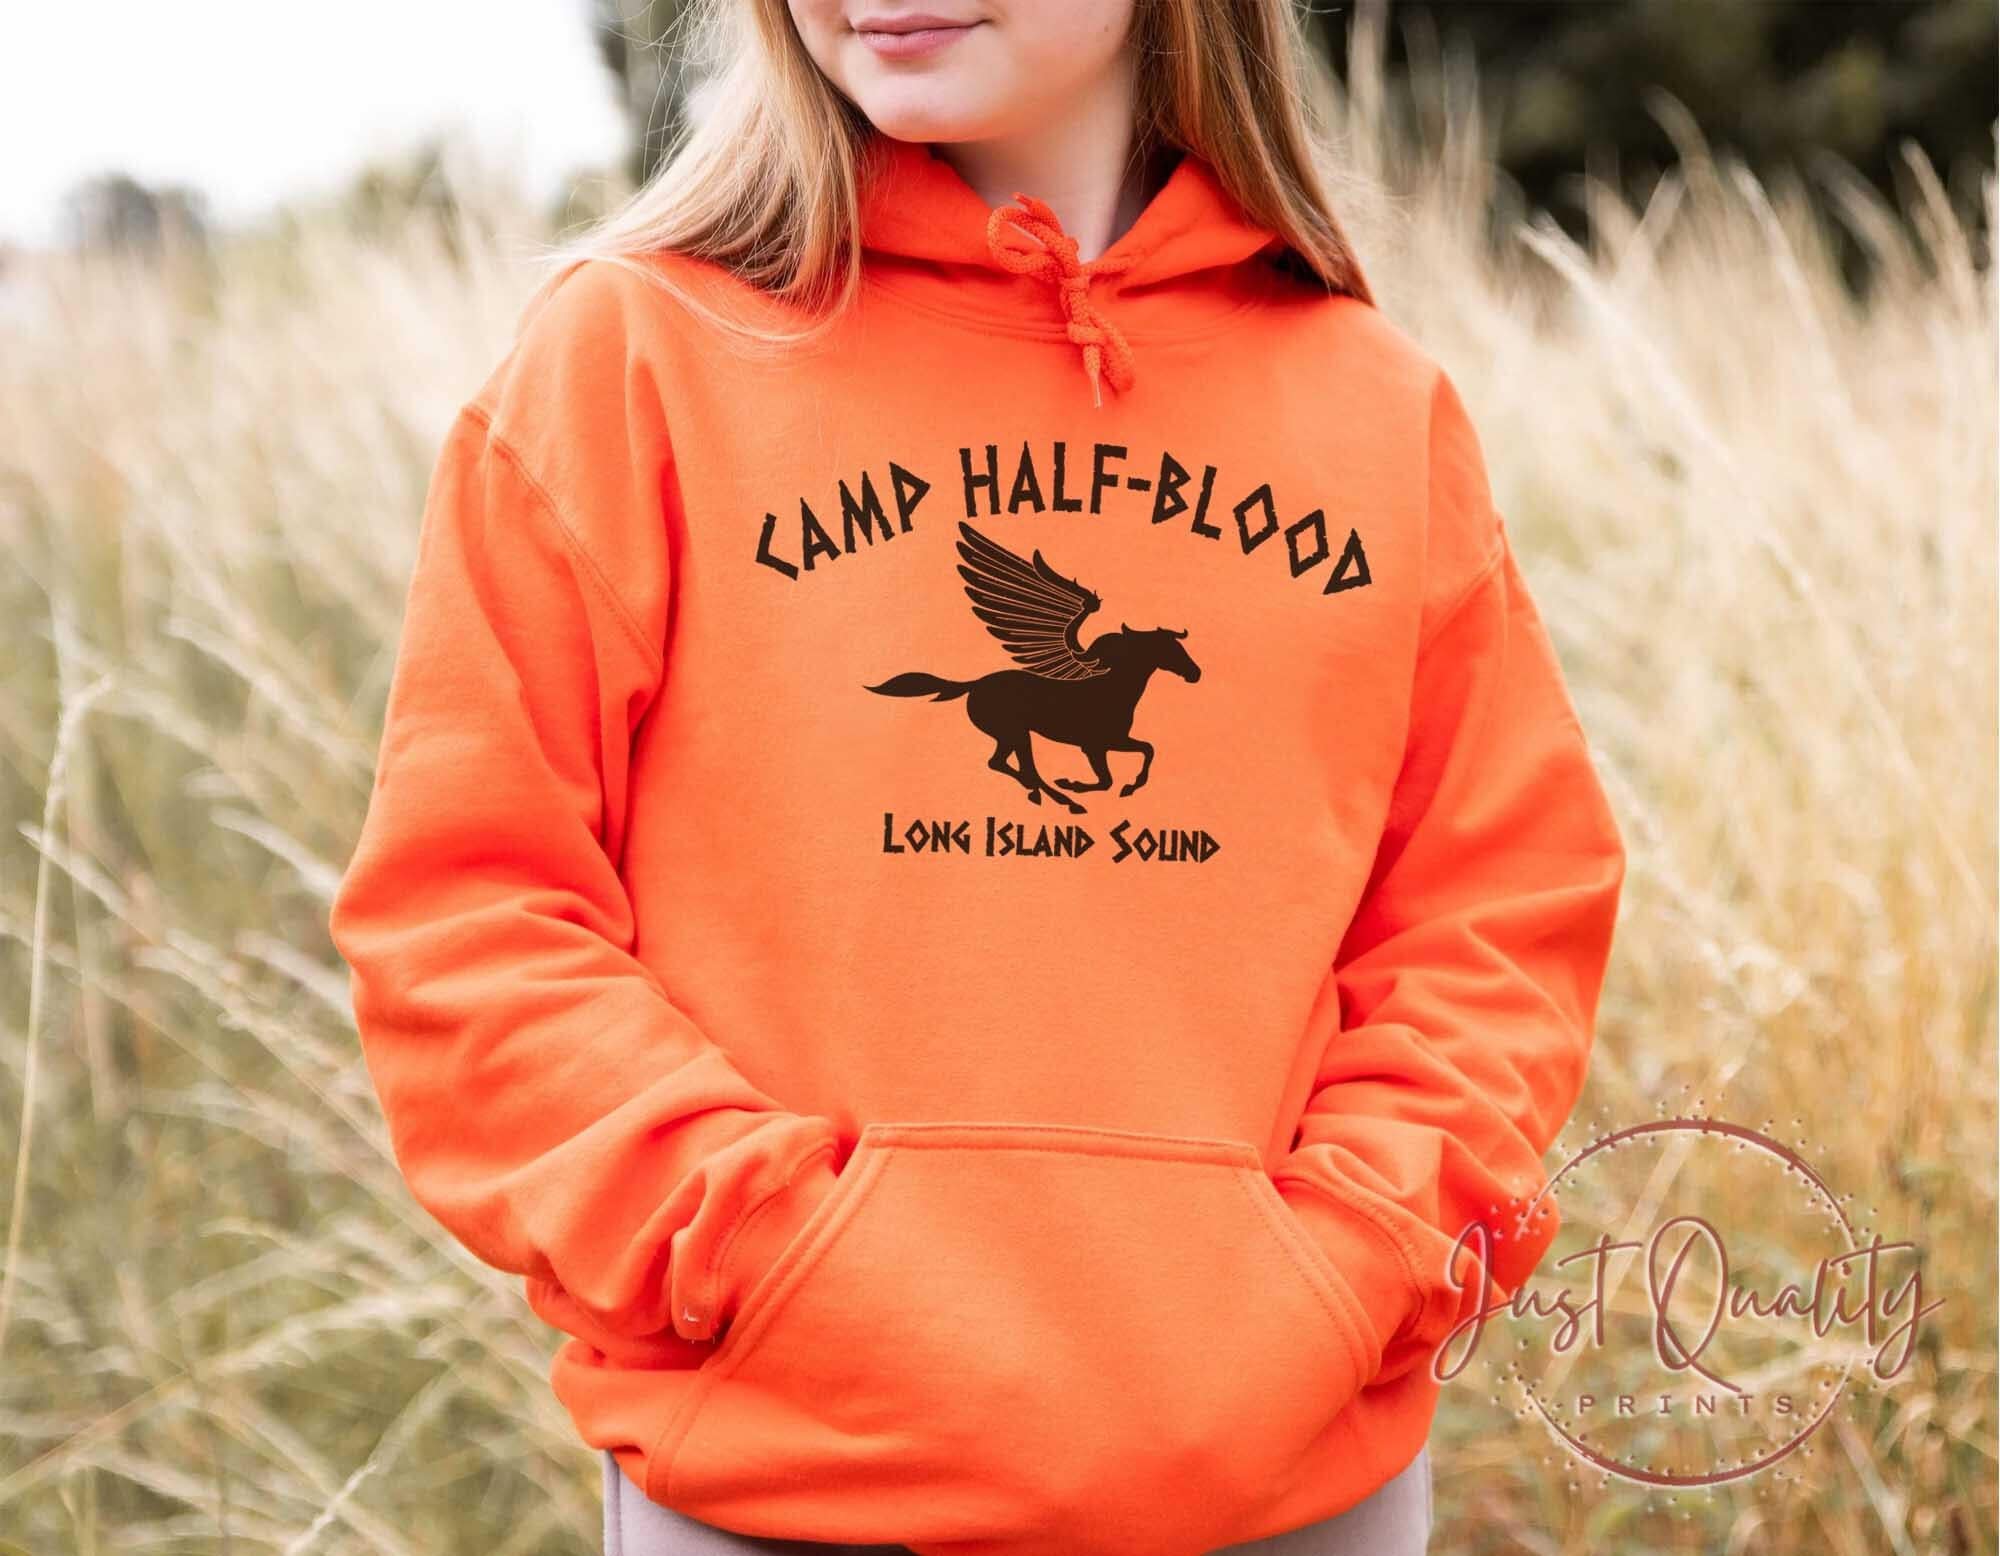  TOOLOUD Camp Half Blood Youth Child Tee - Childrens Half-Blood  T-Shirt : Ropa, Zapatos y Joyería